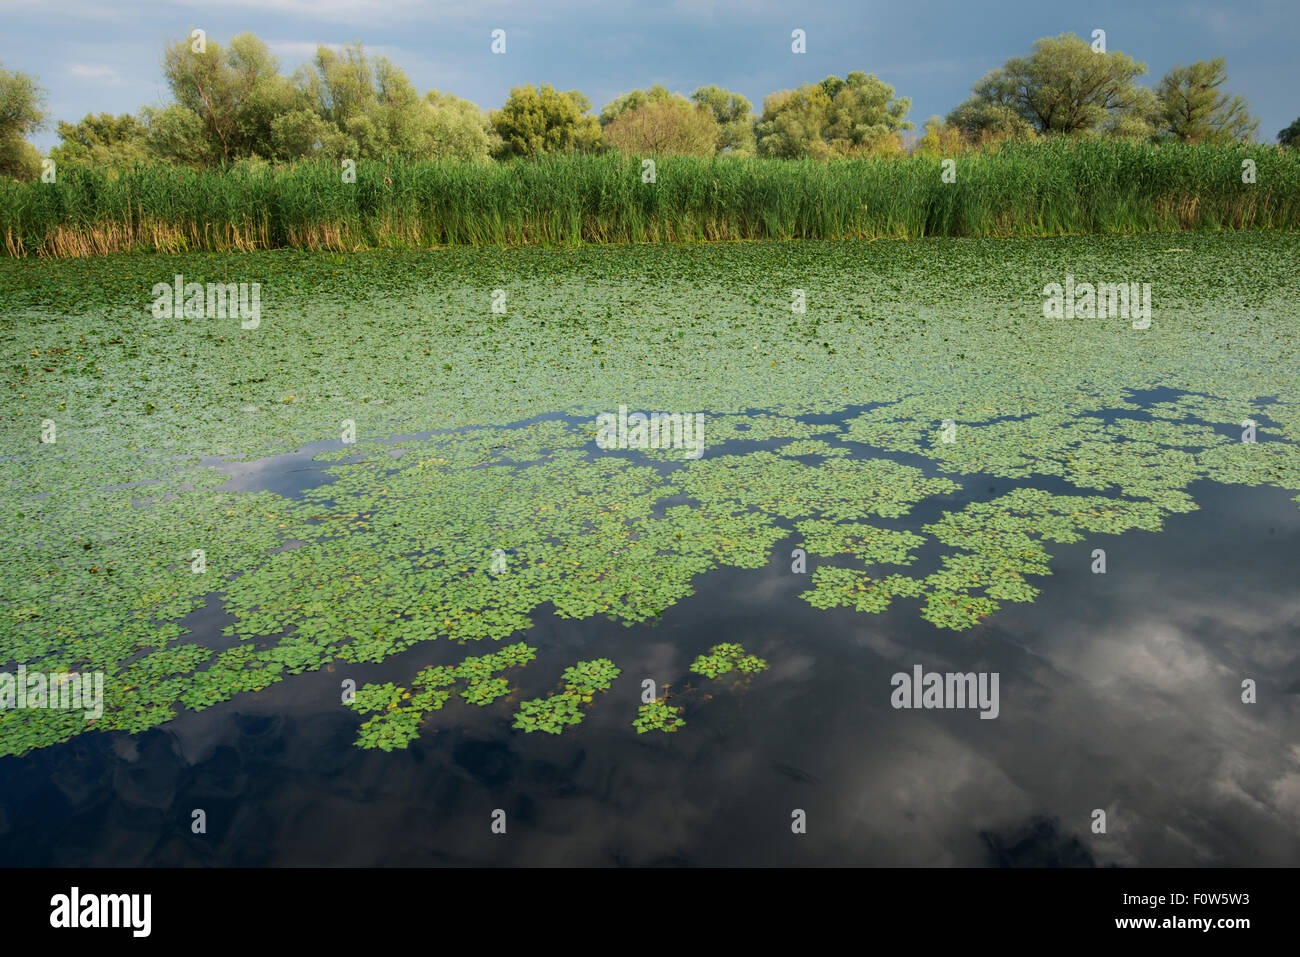 Water chestnut (Trapa natans) growing on waters surface, Danube Delta, Romania, June. Stock Photo